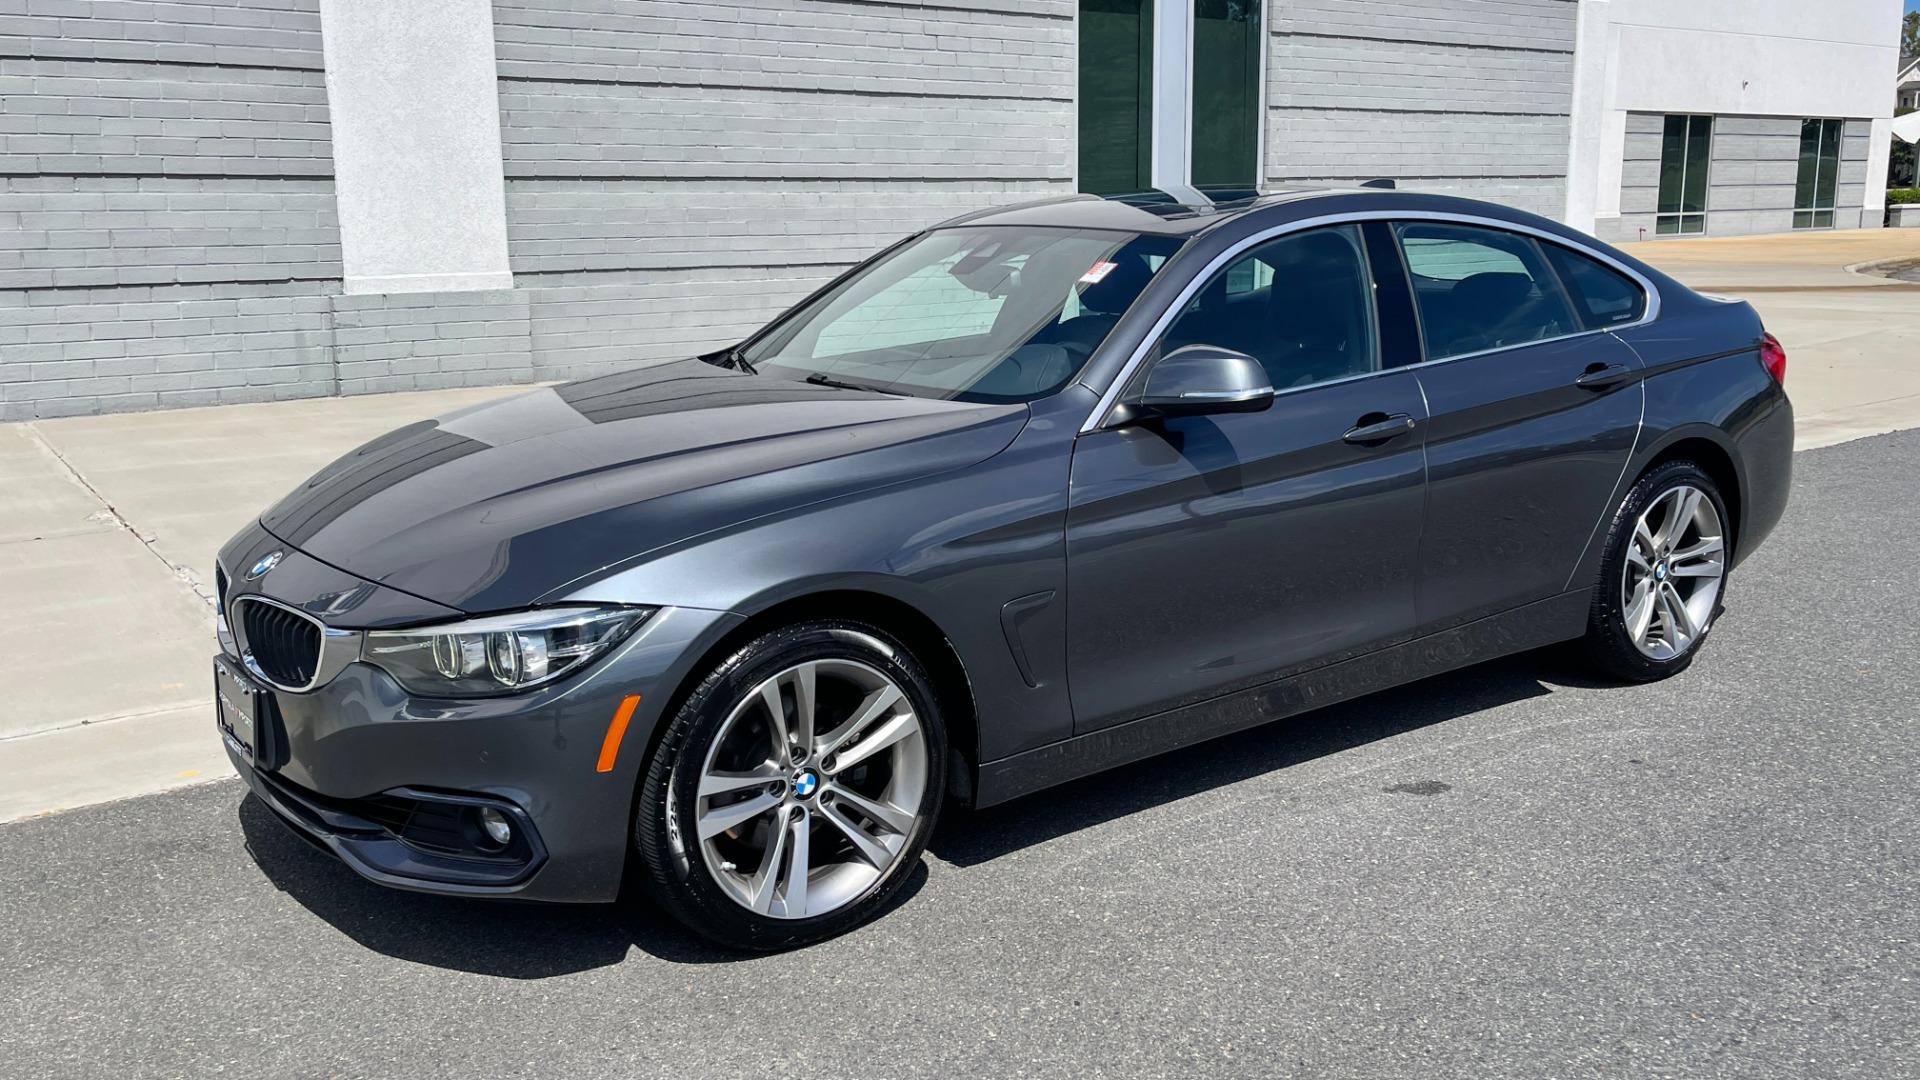 Used 2019 BMW 4 Series 430i xDrive / DRIVER ASSIST / CONVENIENCE / HEATED STEERING / BLIND SPOT /  for sale $27,995 at Formula Imports in Charlotte NC 28227 3